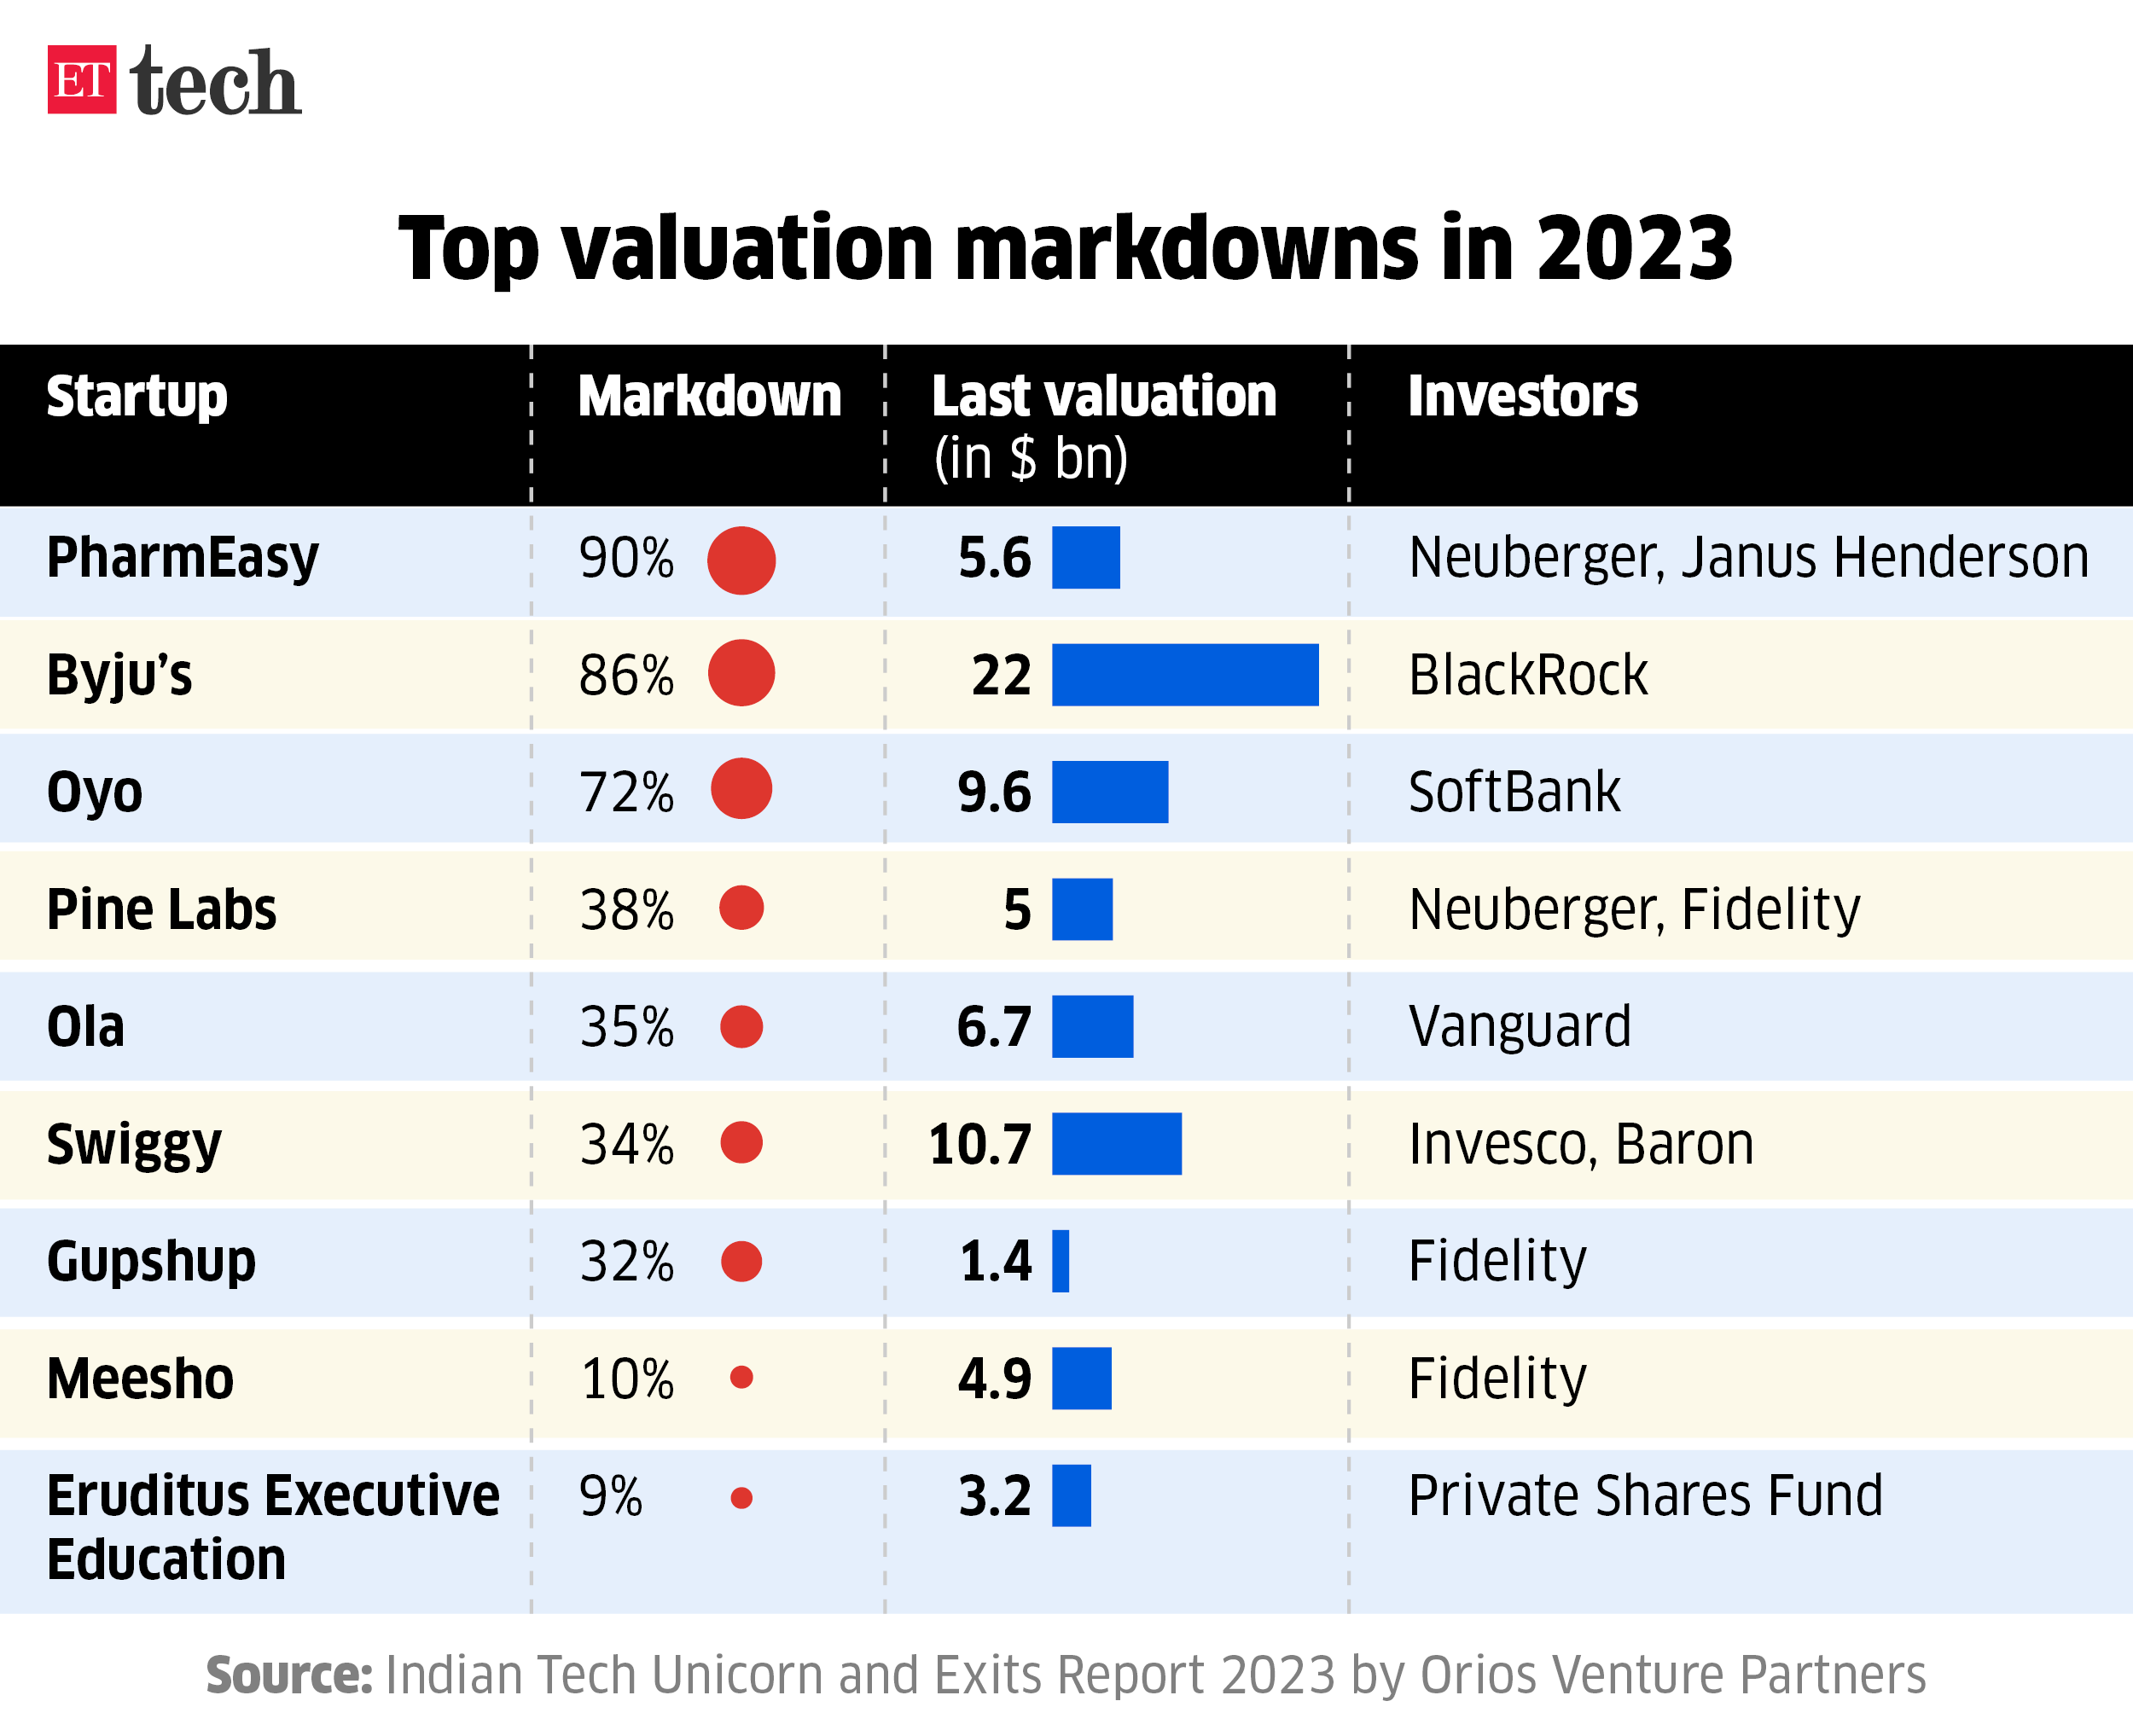 Top valuation markdowns